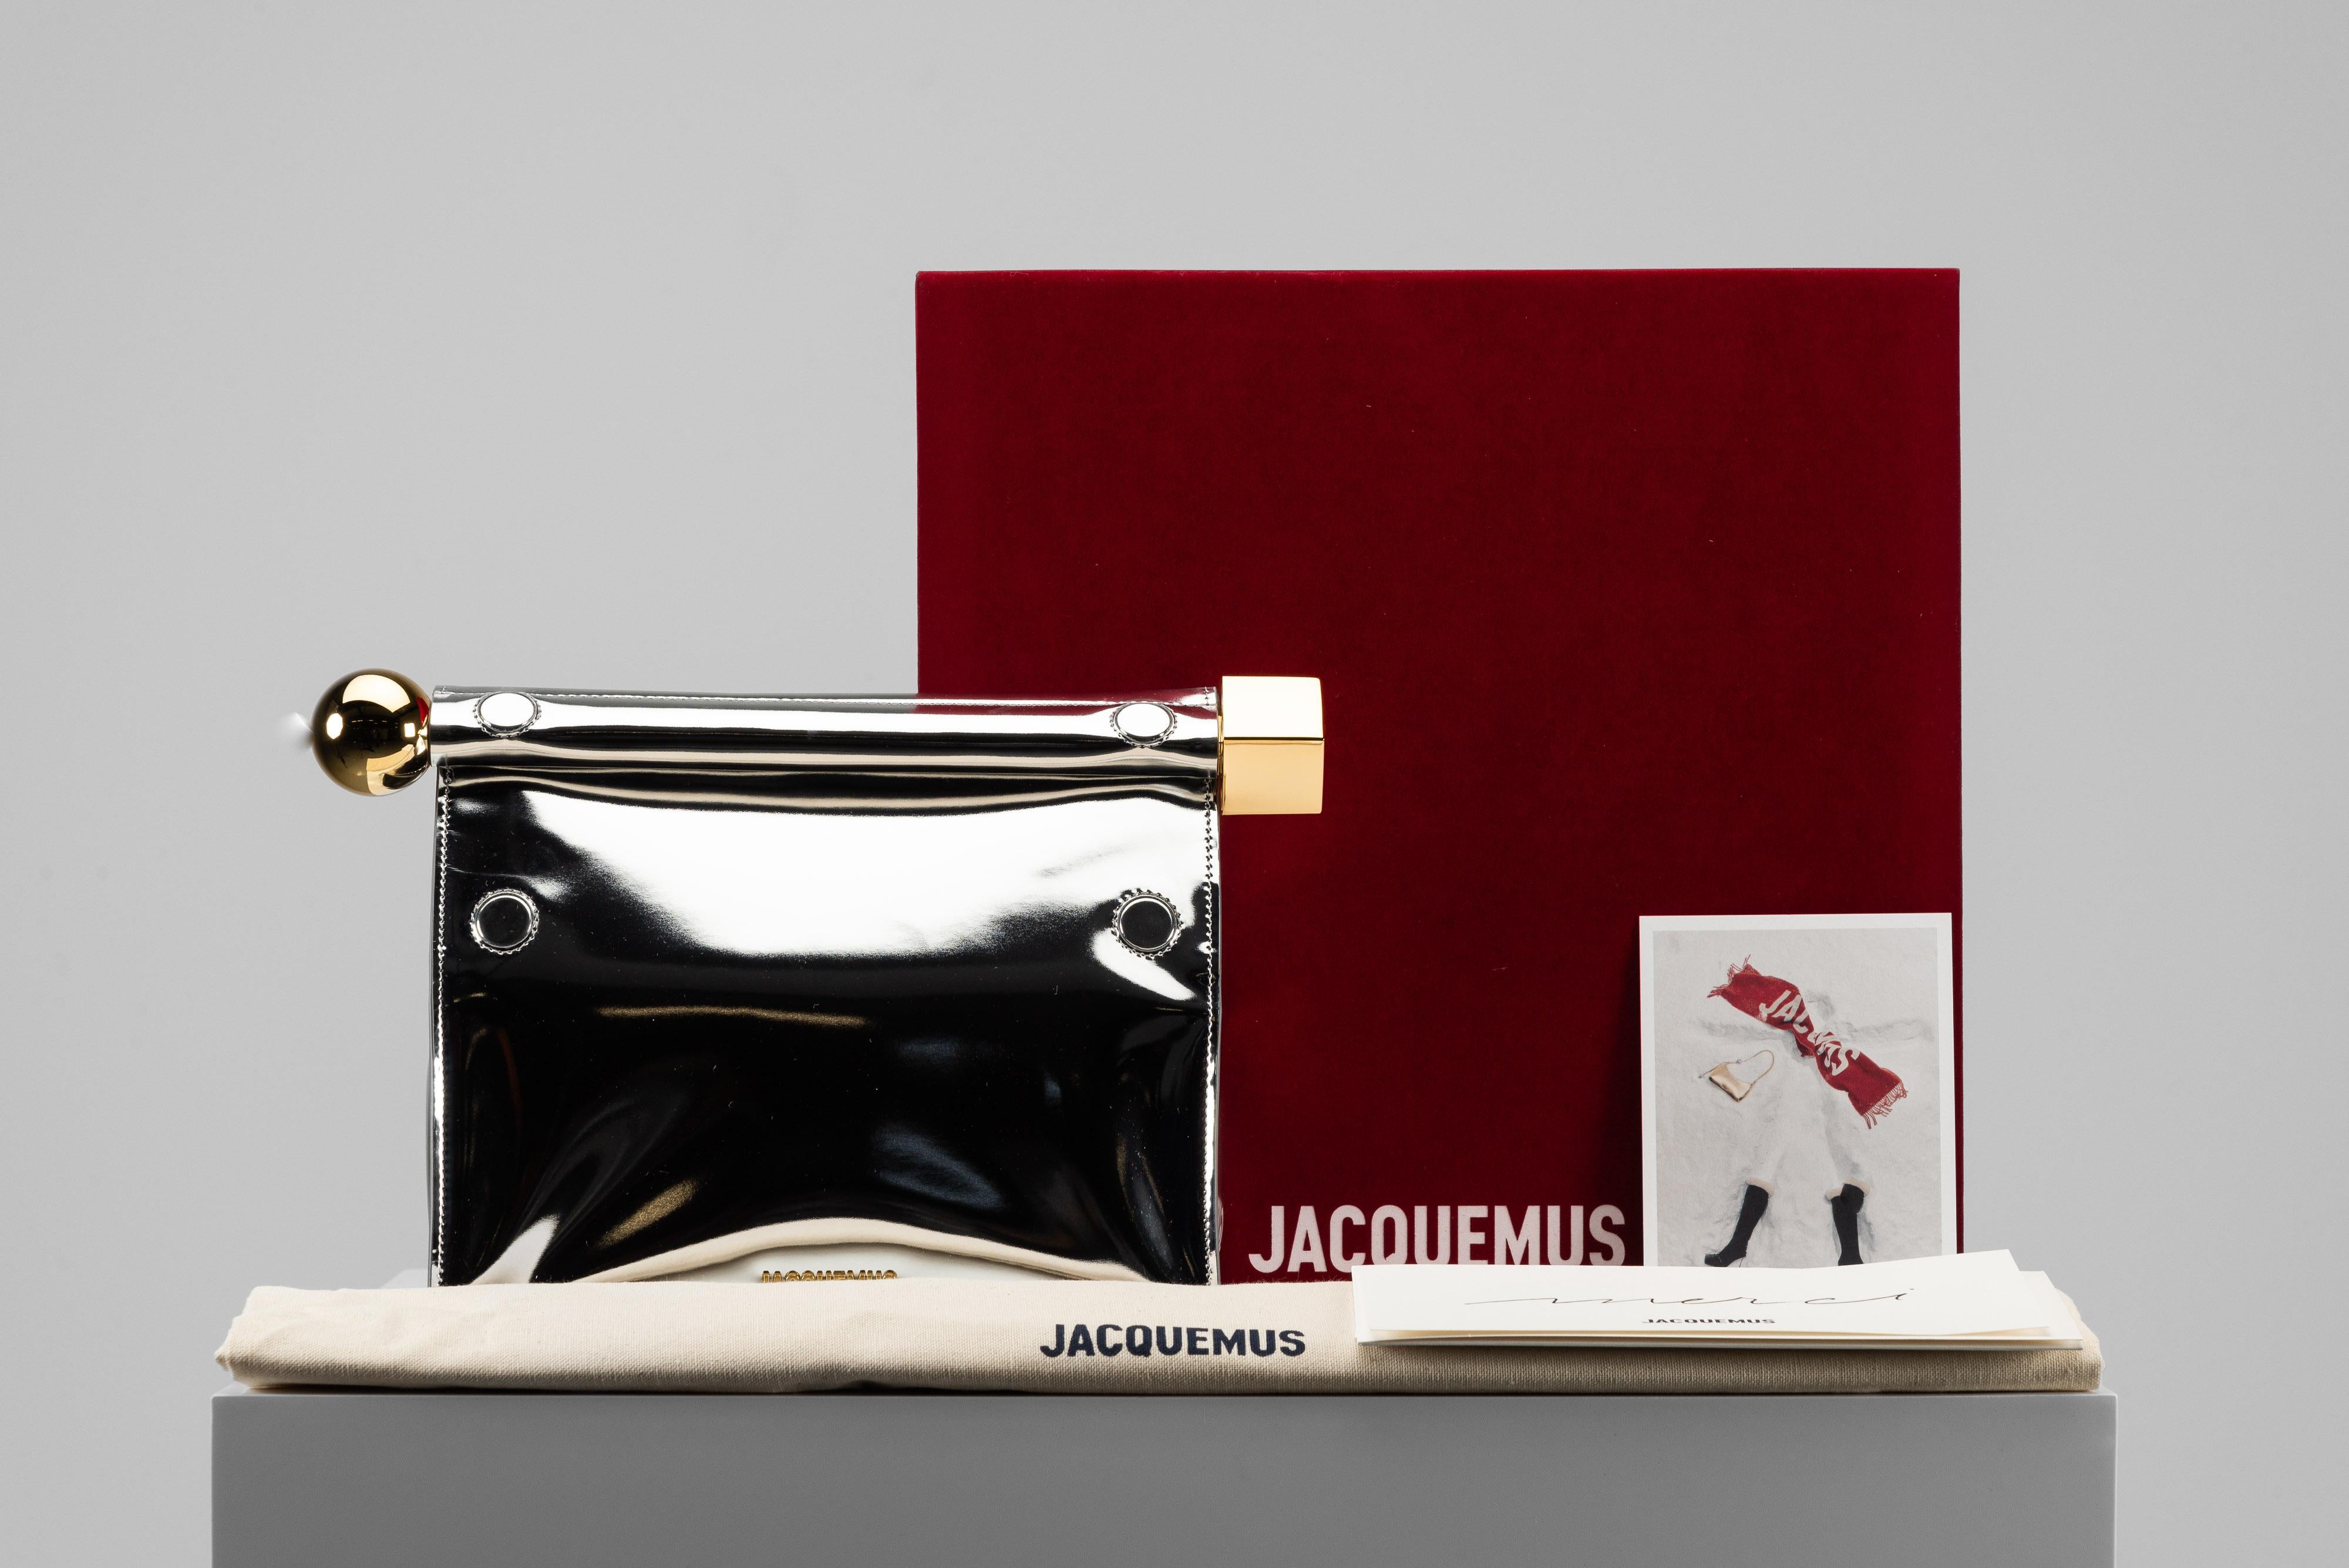 From the collection of SAVINETI we offer this Jacquemus La Pochette Rond Carré NEW:
-    Brand: Jacquemus
-    Model: La Pochette rond carré
-    Color: Silver
-    Year: 2023
-    Condition: NEW (unused)
-    Extras: Full-Set (Dustbag, Box &